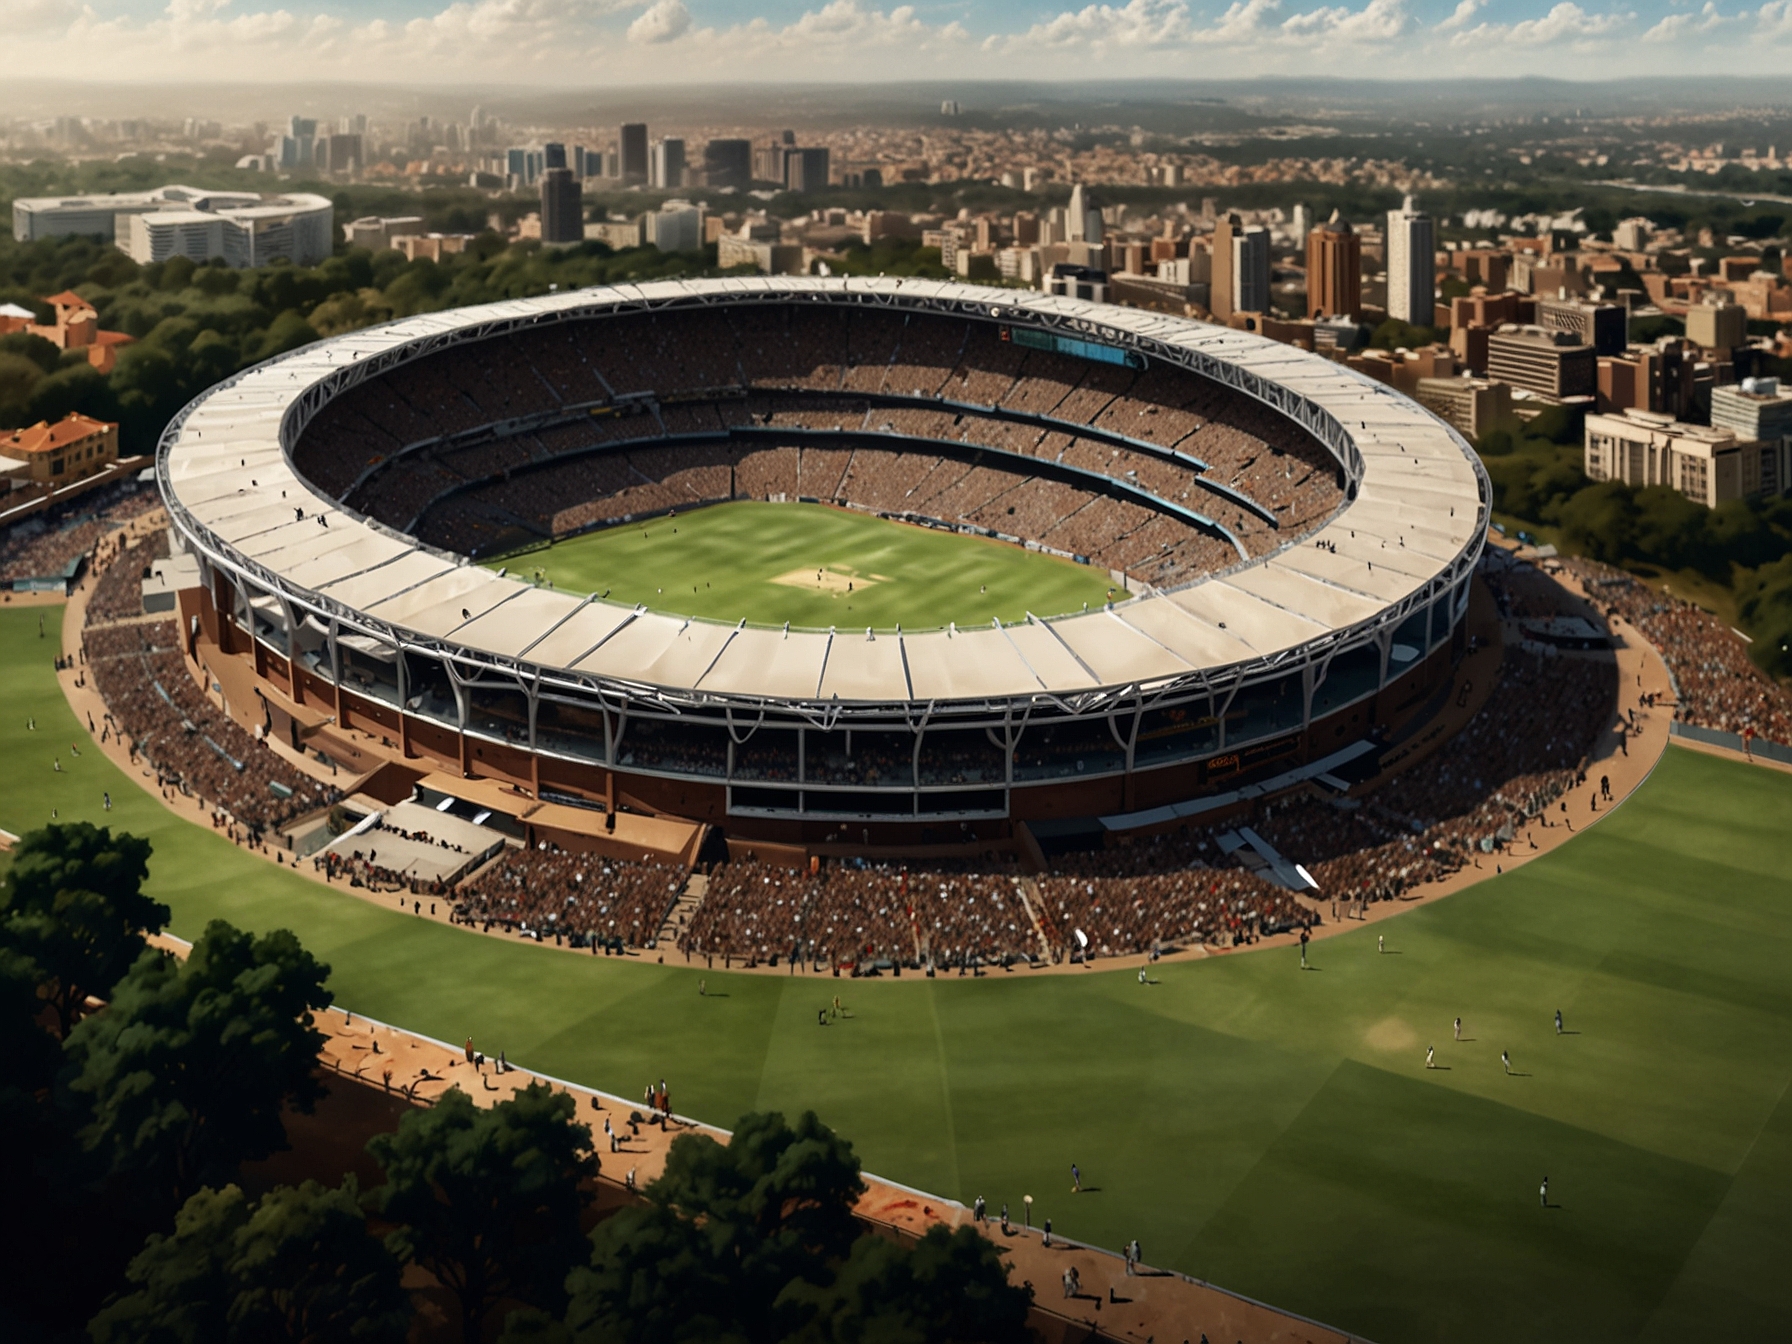 An overhead shot of the iconic Wanderers Stadium in Johannesburg filled with fans, capturing the excitement and anticipation ahead of the South Africa vs India T20 series.